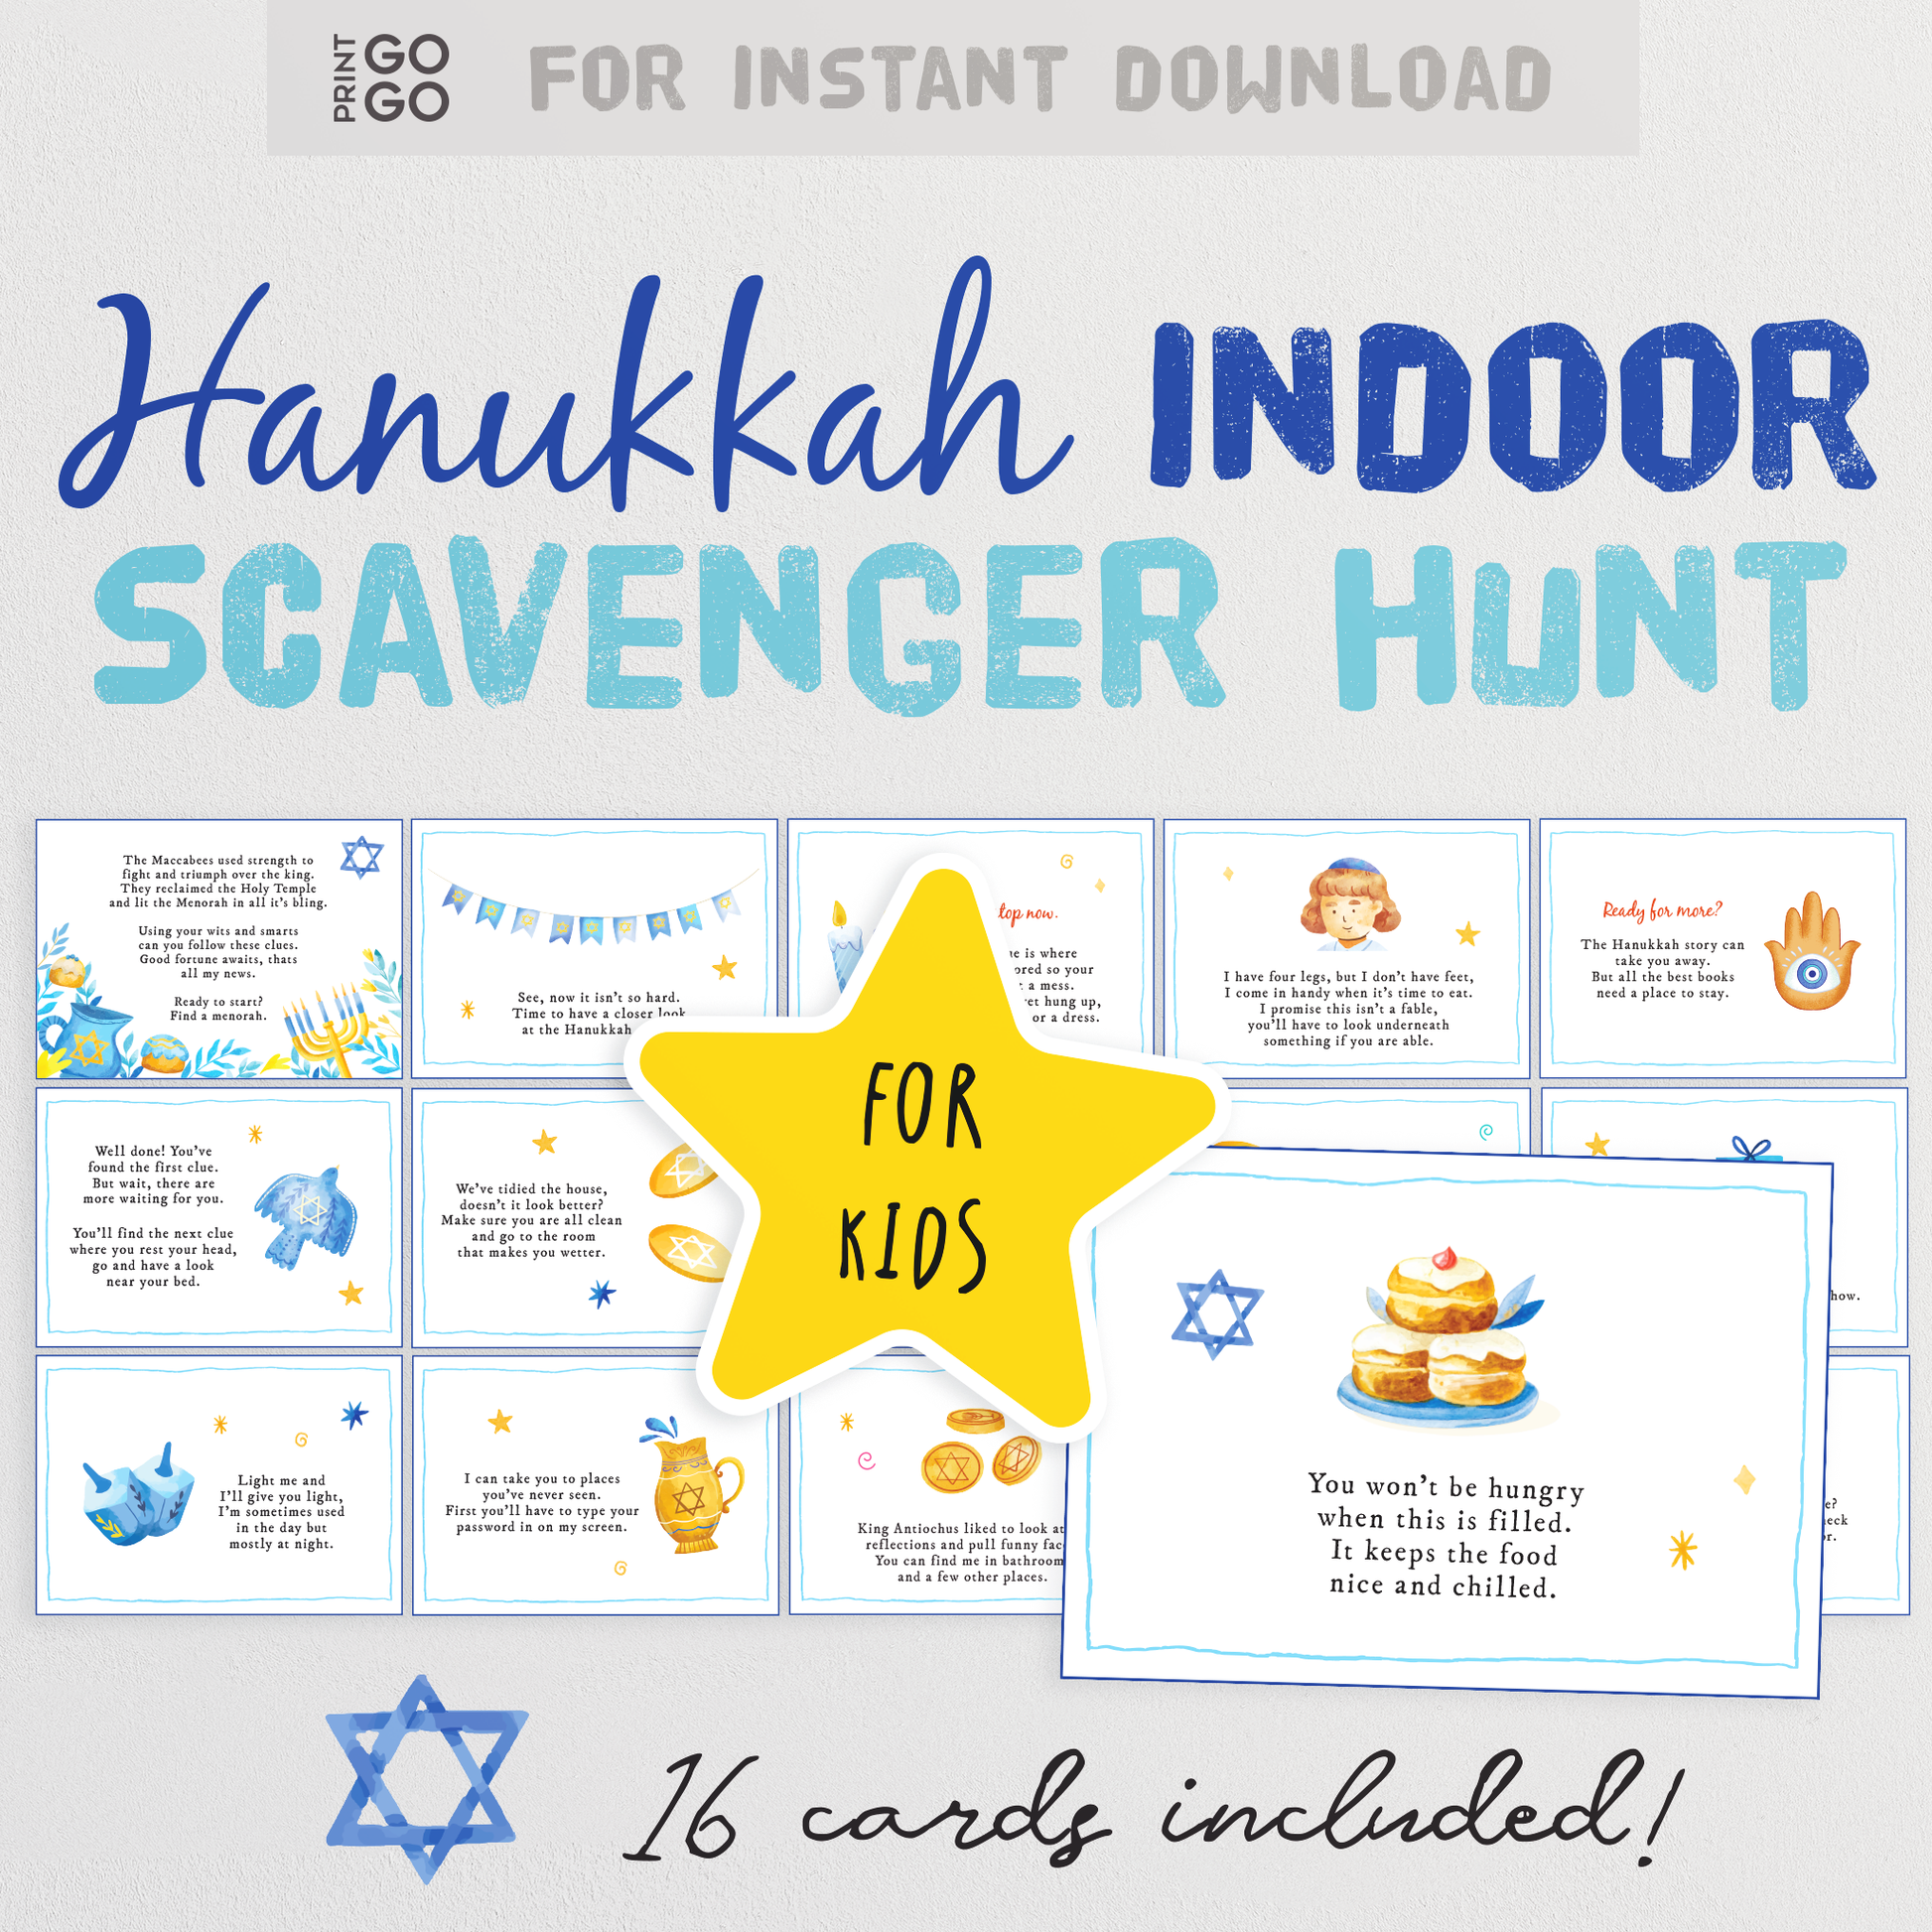 Hanukkah Scavenger Hunt for Kids - Celebrate the Festival of Lights with a Fun Race Around The House In Search of a Surprise!